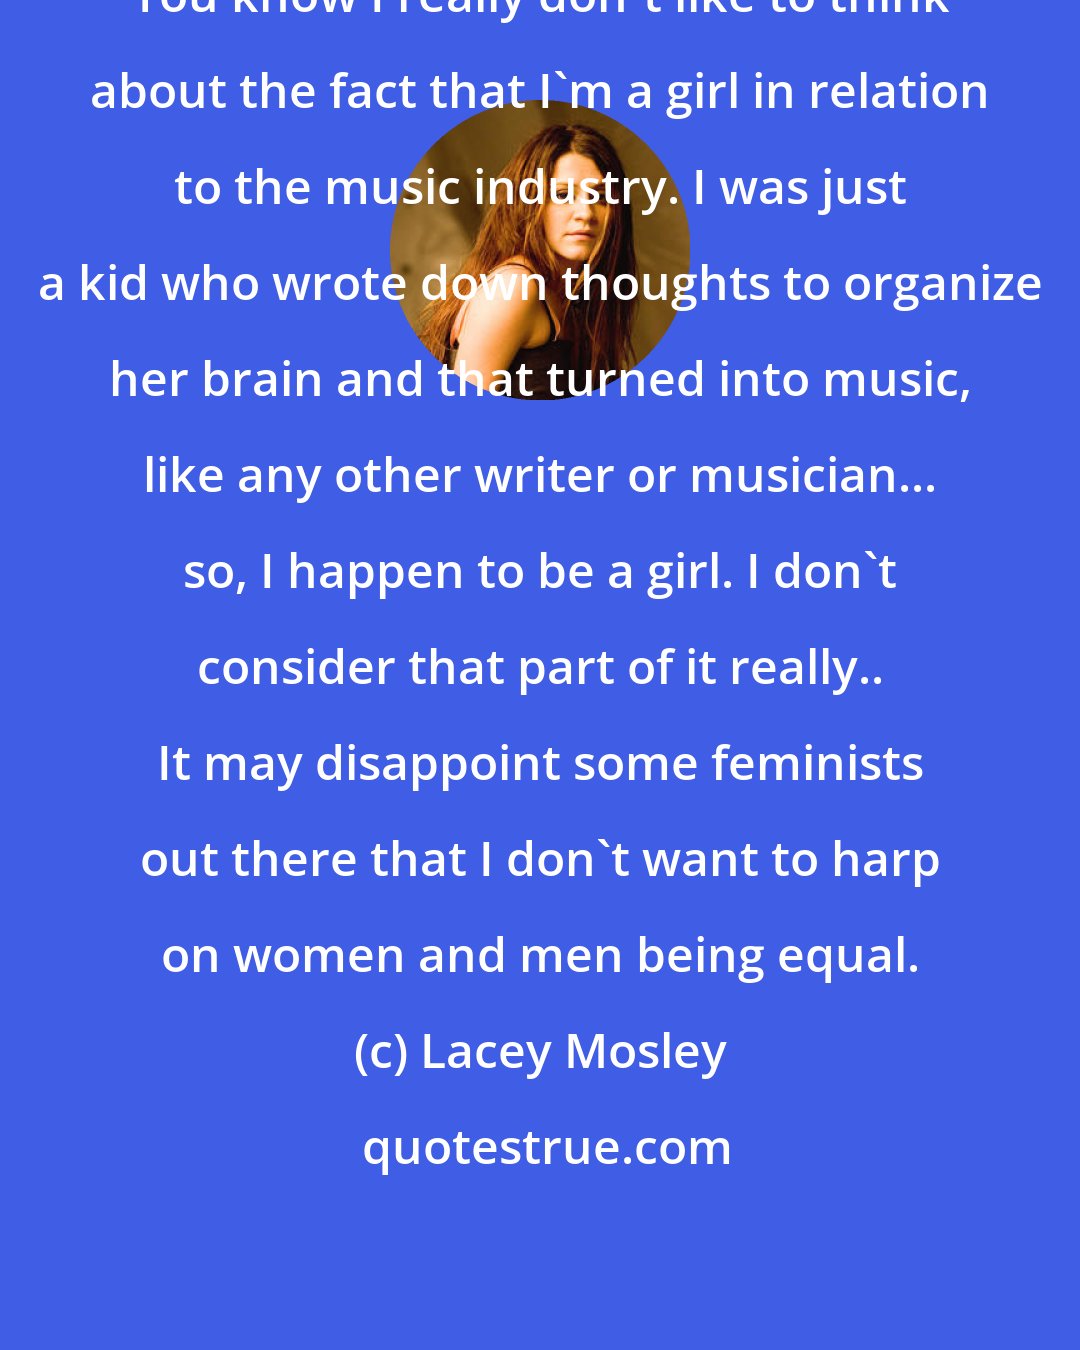 Lacey Mosley: You know I really don't like to think about the fact that I'm a girl in relation to the music industry. I was just a kid who wrote down thoughts to organize her brain and that turned into music, like any other writer or musician... so, I happen to be a girl. I don't consider that part of it really.. It may disappoint some feminists out there that I don't want to harp on women and men being equal.